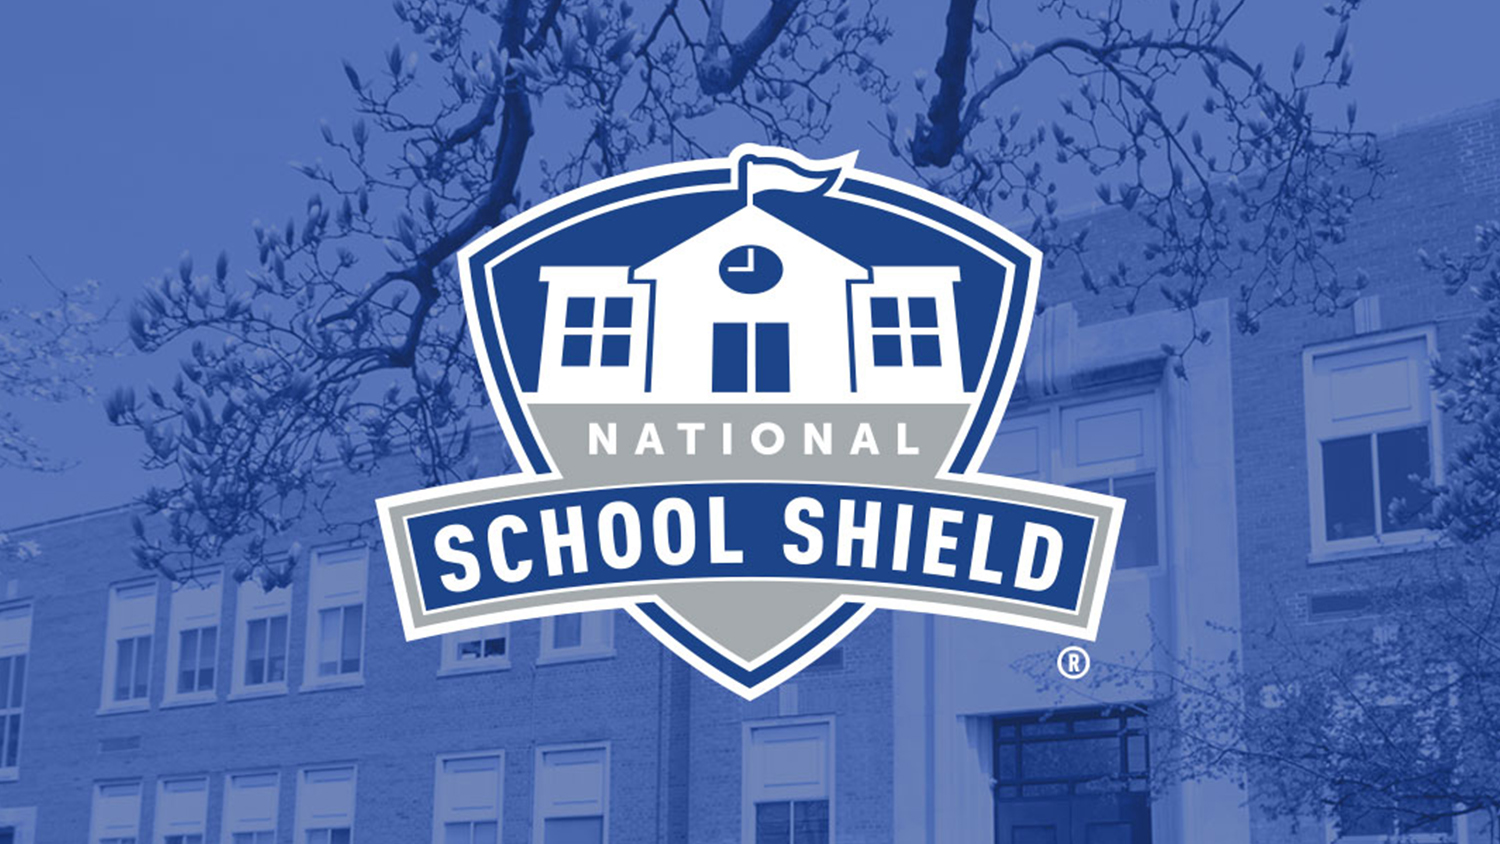 Fairbanks Daily News-Miner: Learn about National School Shield